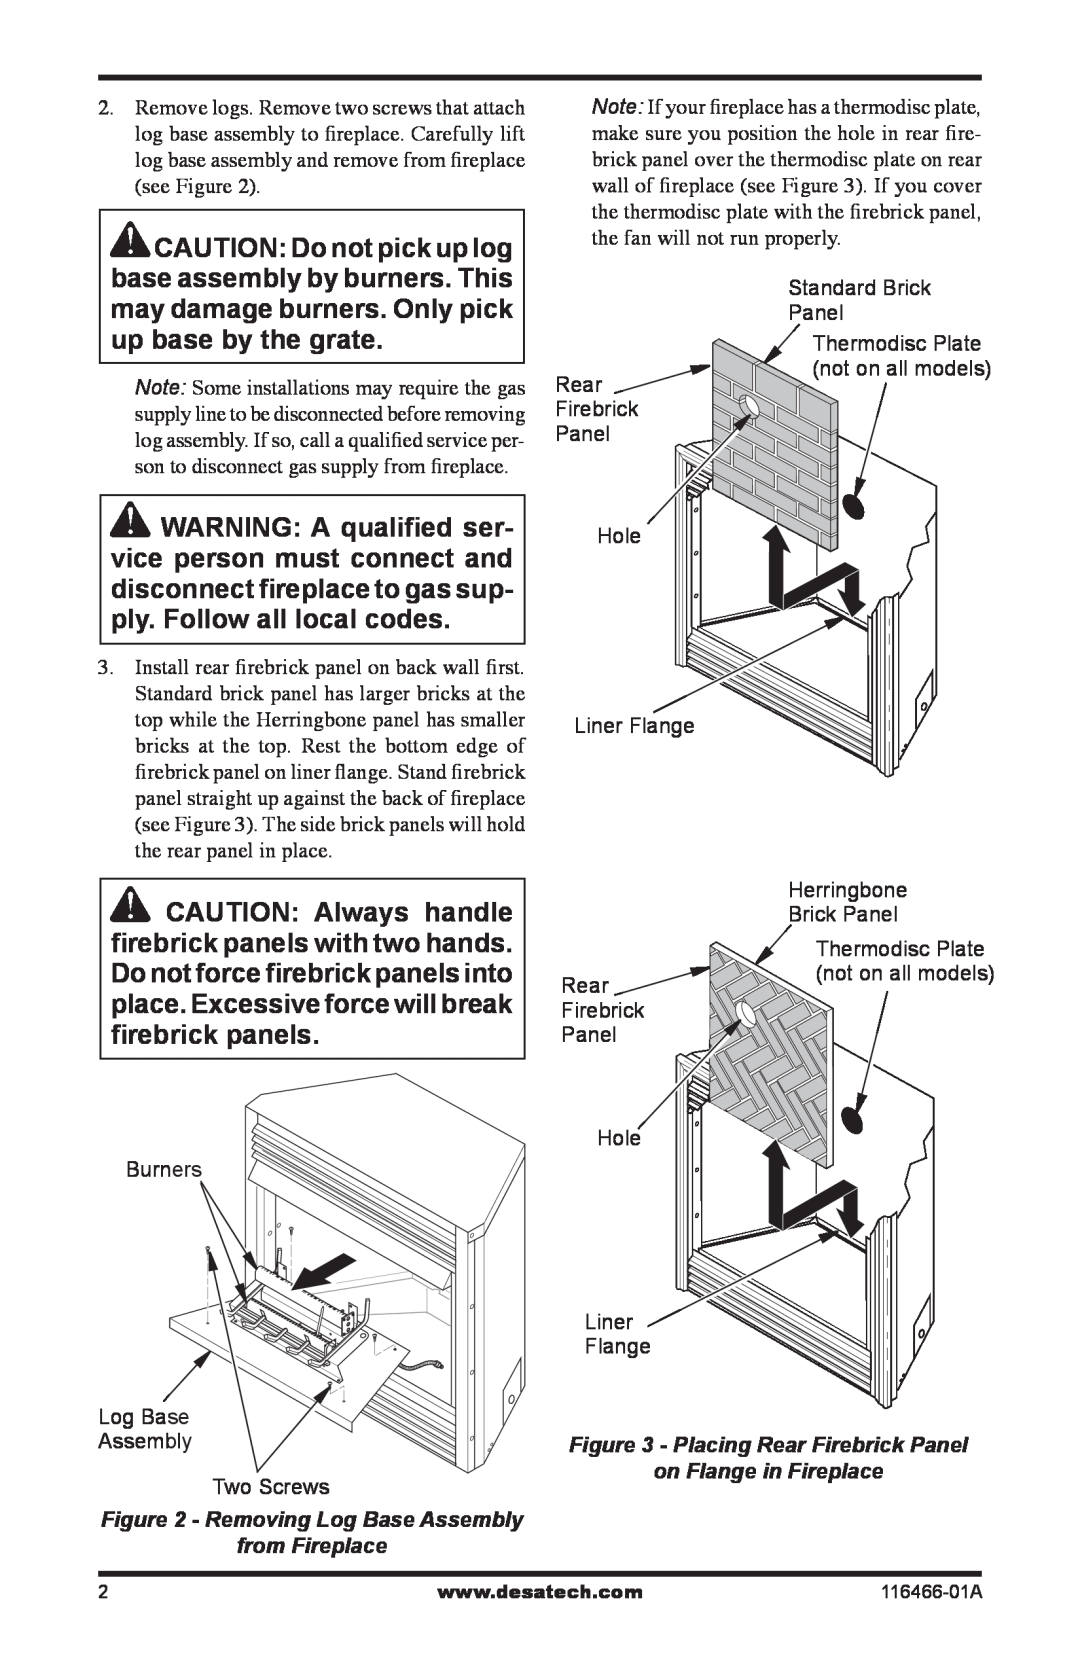 Desa HFL300 installation instructions Removing Log Base Assembly, from Fireplace 